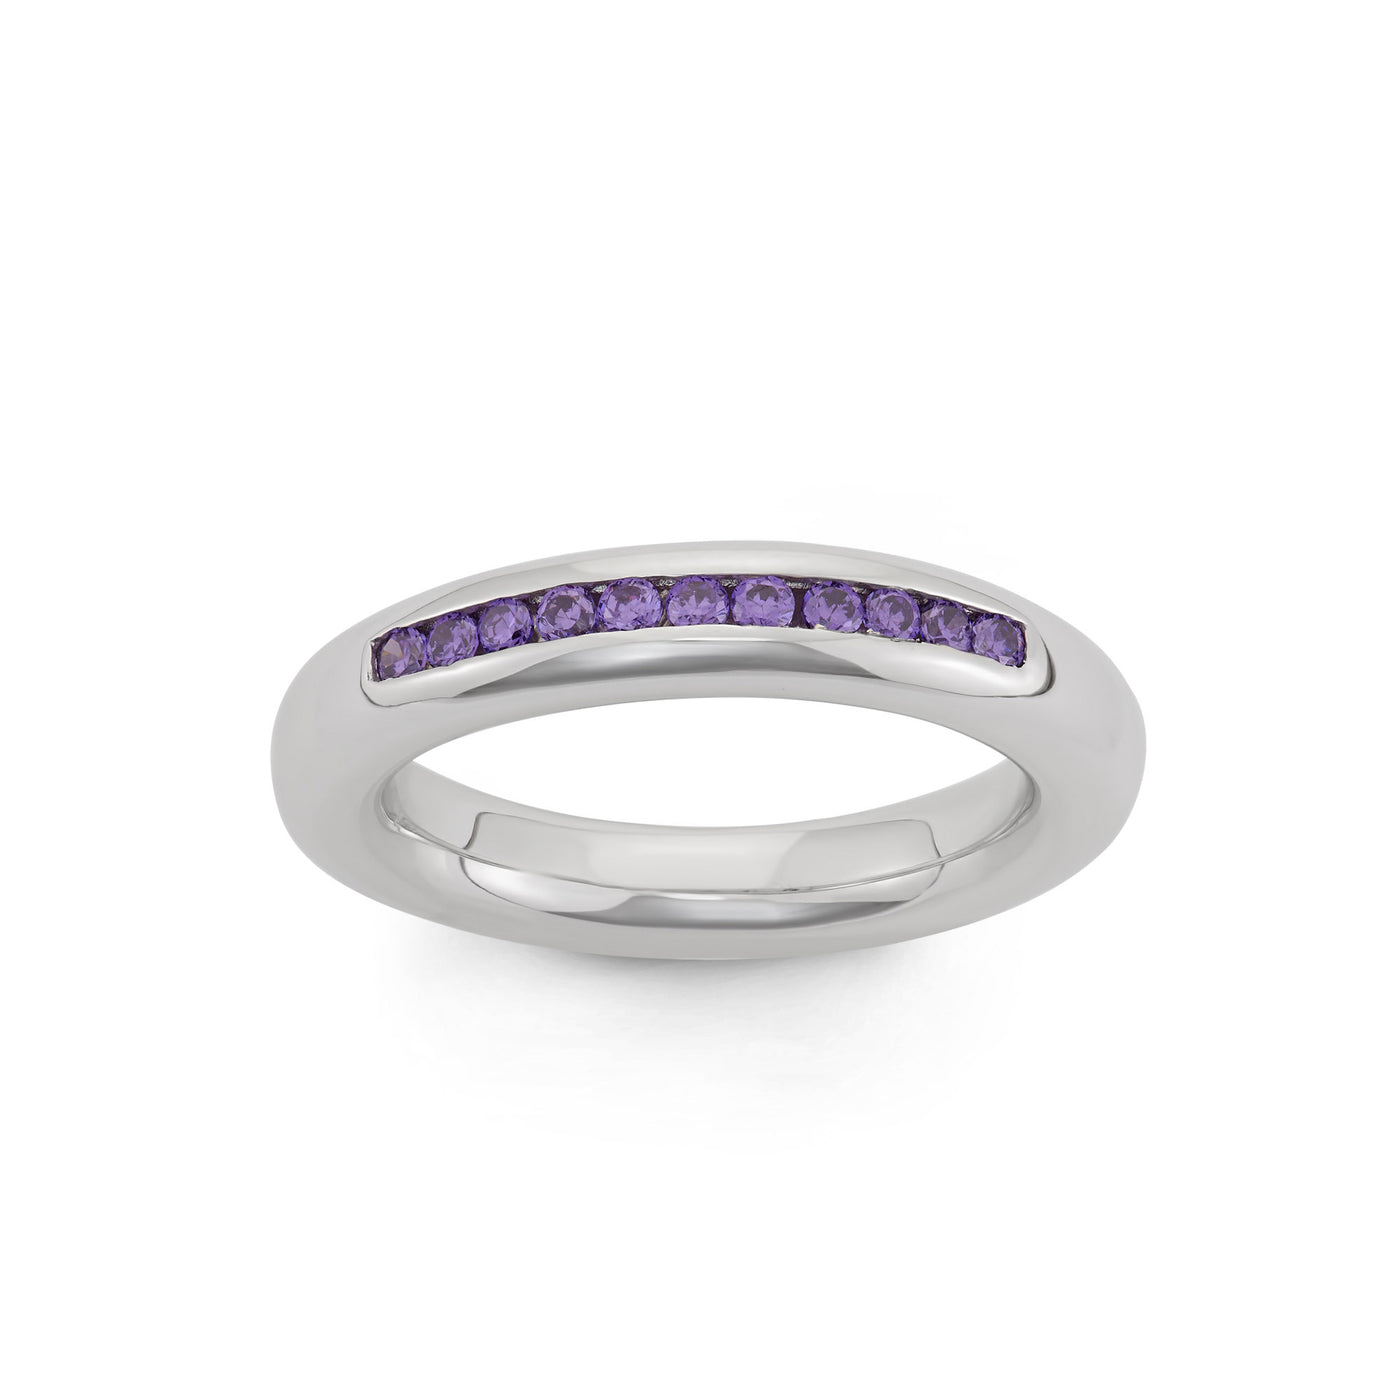 Rebecca Sloane Silver Spinning Ring With Row Of Purple Set CZ